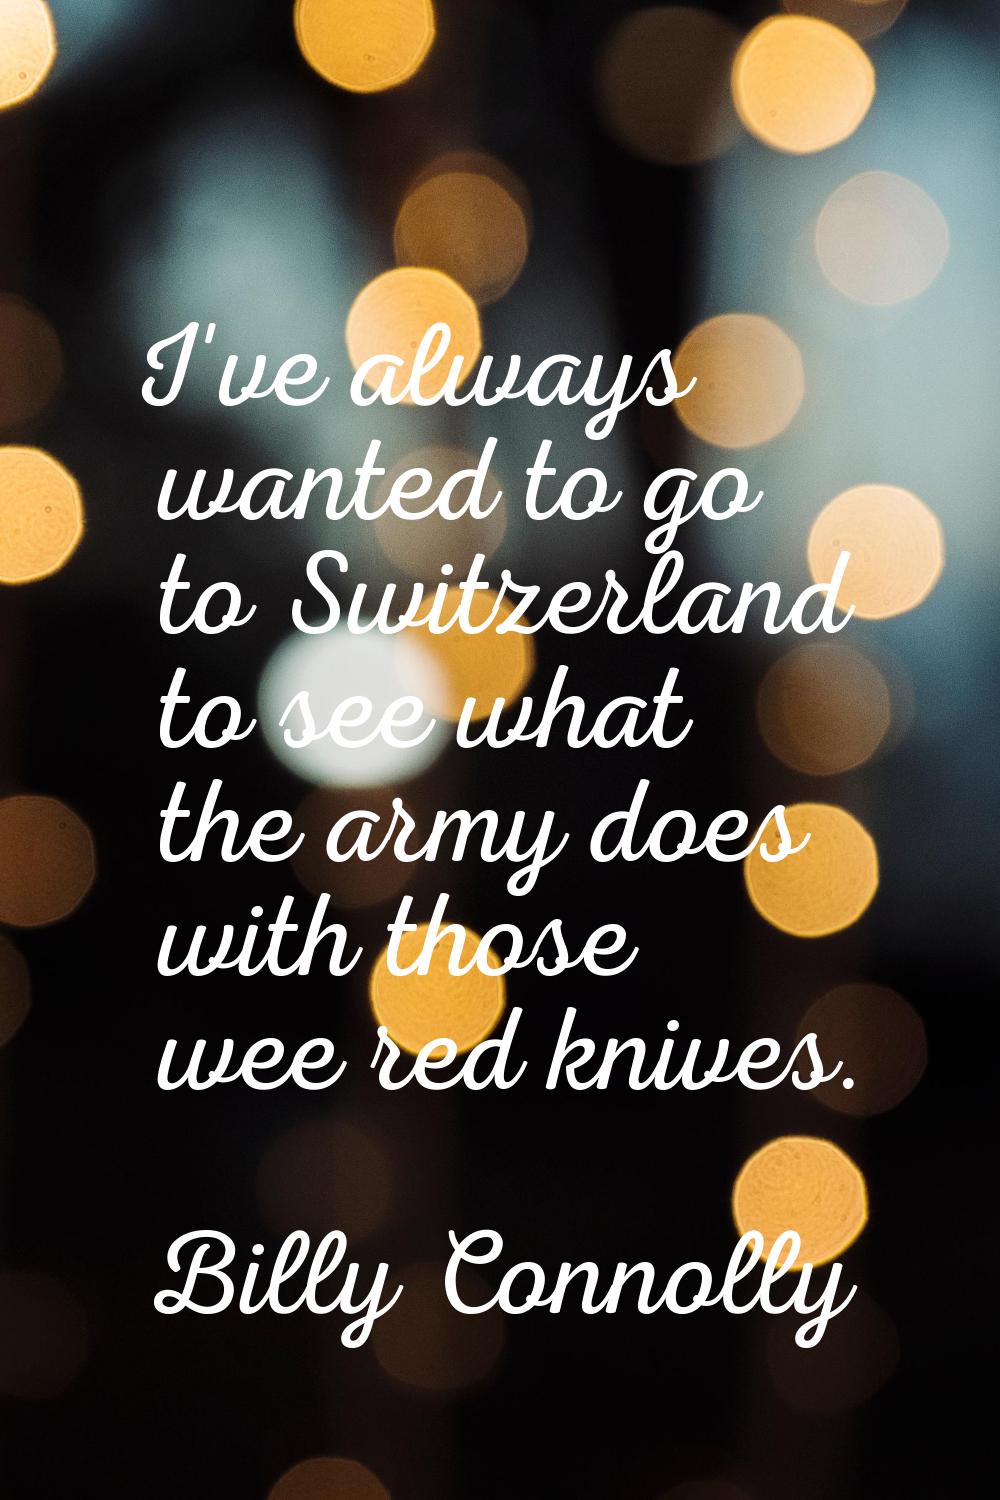 I've always wanted to go to Switzerland to see what the army does with those wee red knives.